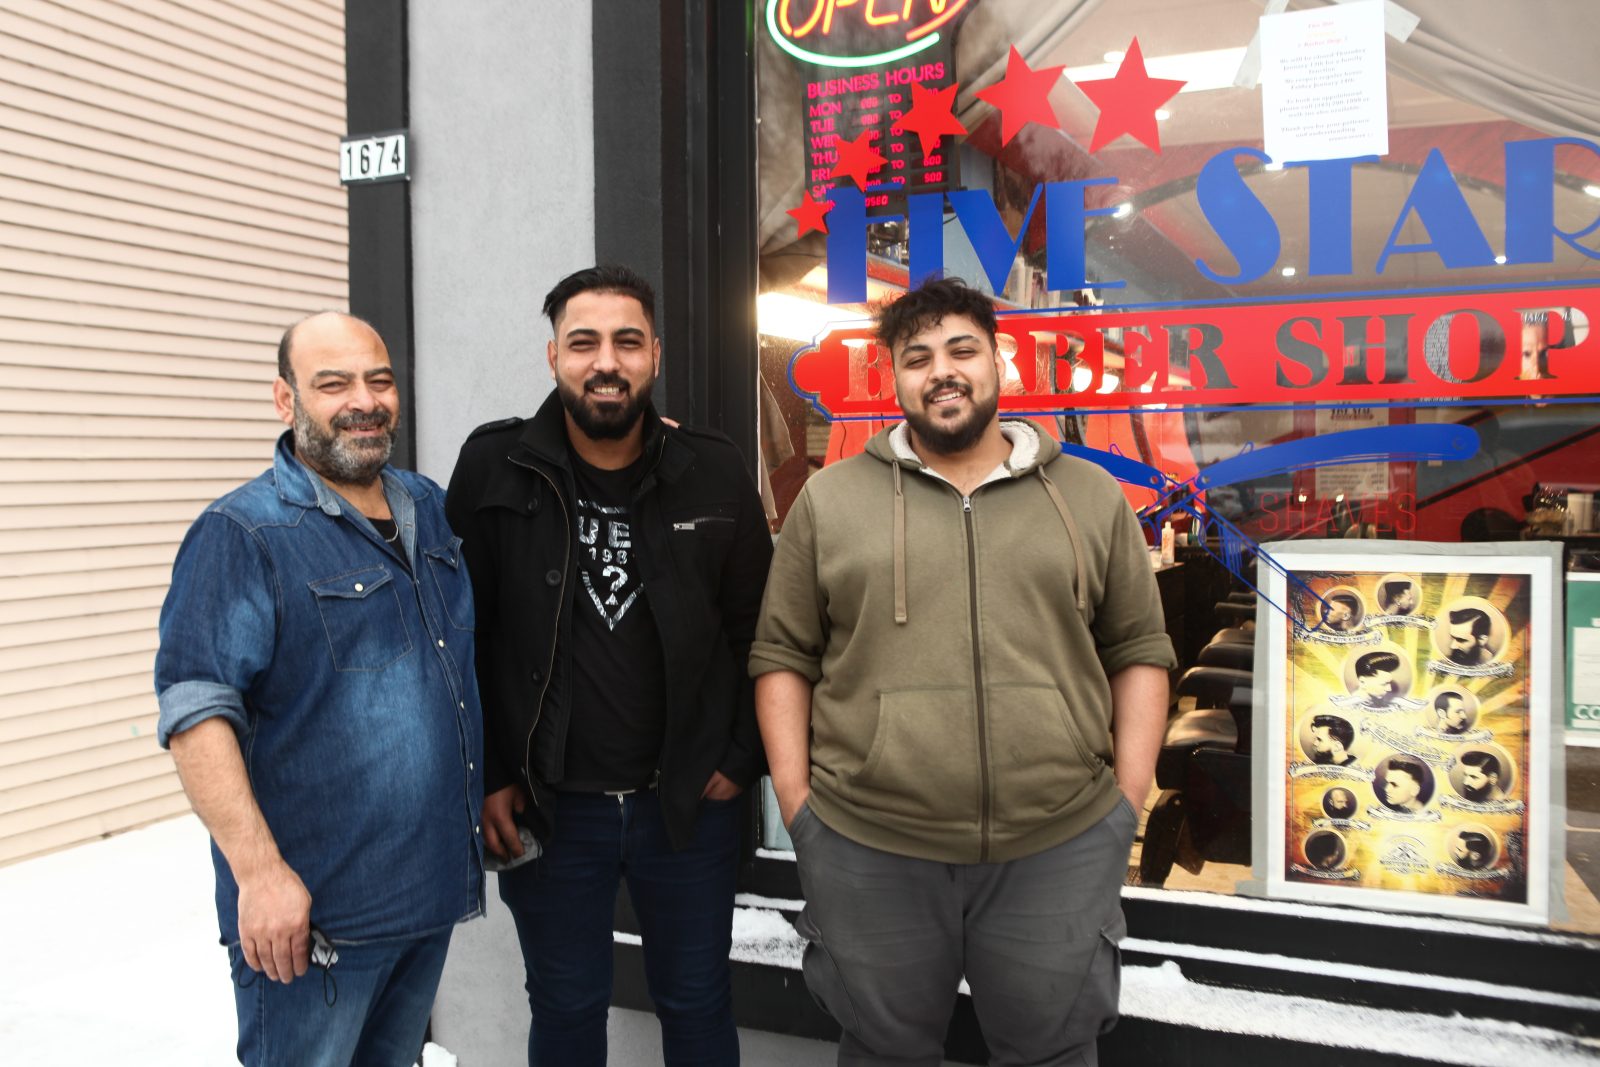 Church sponsoring Rockland barber to help son immigrate